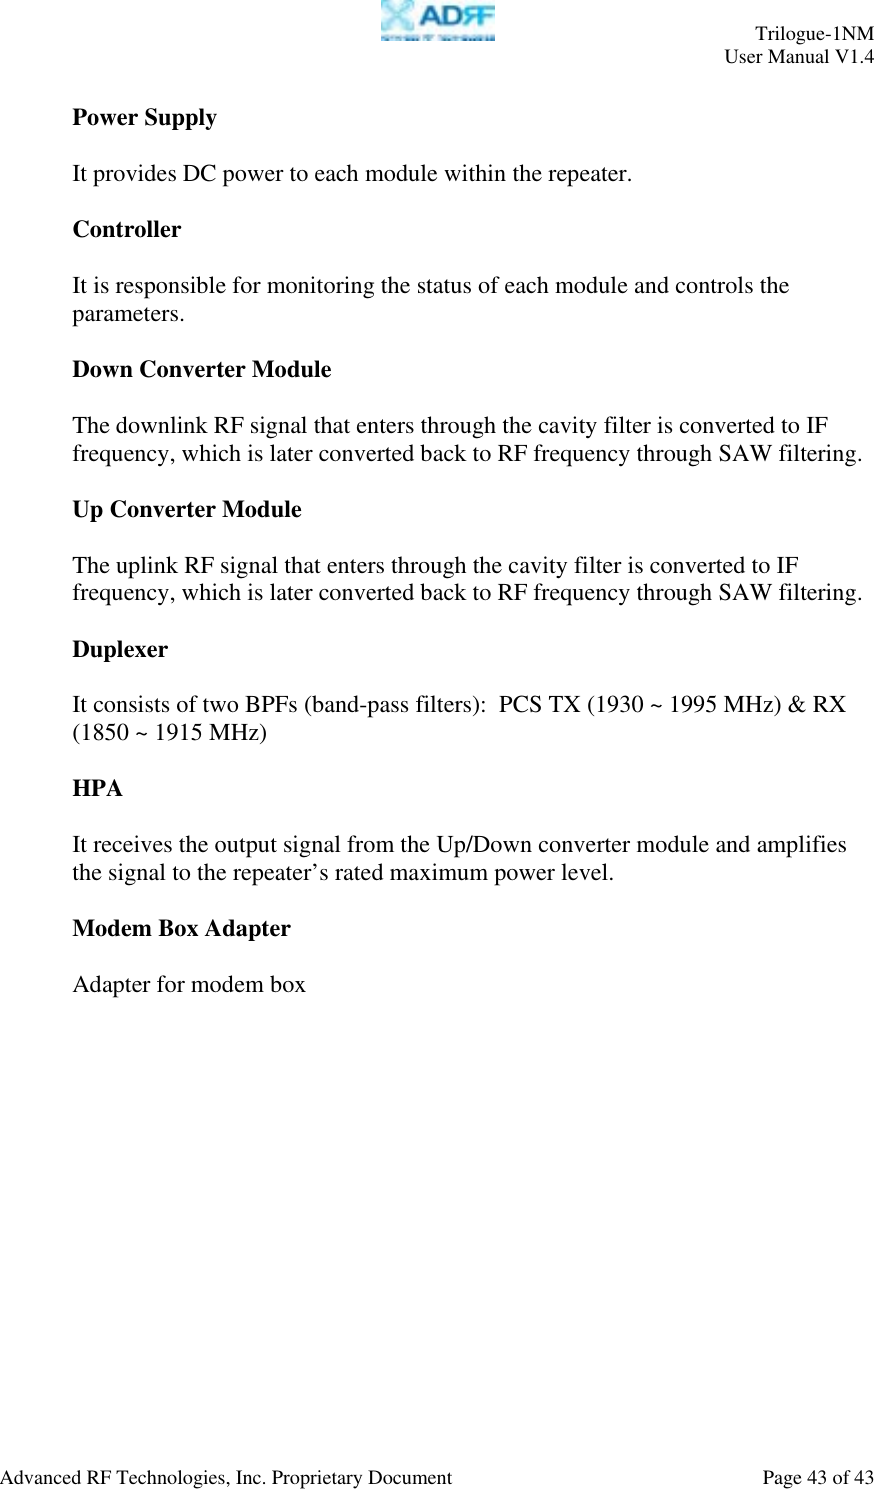     Trilogue-1NM User Manual V1.4  Advanced RF Technologies, Inc. Proprietary Document  Page 43 of 43  Power Supply  It provides DC power to each module within the repeater.  Controller  It is responsible for monitoring the status of each module and controls the parameters.    Down Converter Module  The downlink RF signal that enters through the cavity filter is converted to IF frequency, which is later converted back to RF frequency through SAW filtering.    Up Converter Module   The uplink RF signal that enters through the cavity filter is converted to IF frequency, which is later converted back to RF frequency through SAW filtering.    Duplexer  It consists of two BPFs (band-pass filters):  PCS TX (1930 ~ 1995 MHz) &amp; RX (1850 ~ 1915 MHz)  HPA   It receives the output signal from the Up/Down converter module and amplifies the signal to the repeater’s rated maximum power level.  Modem Box Adapter   Adapter for modem box  